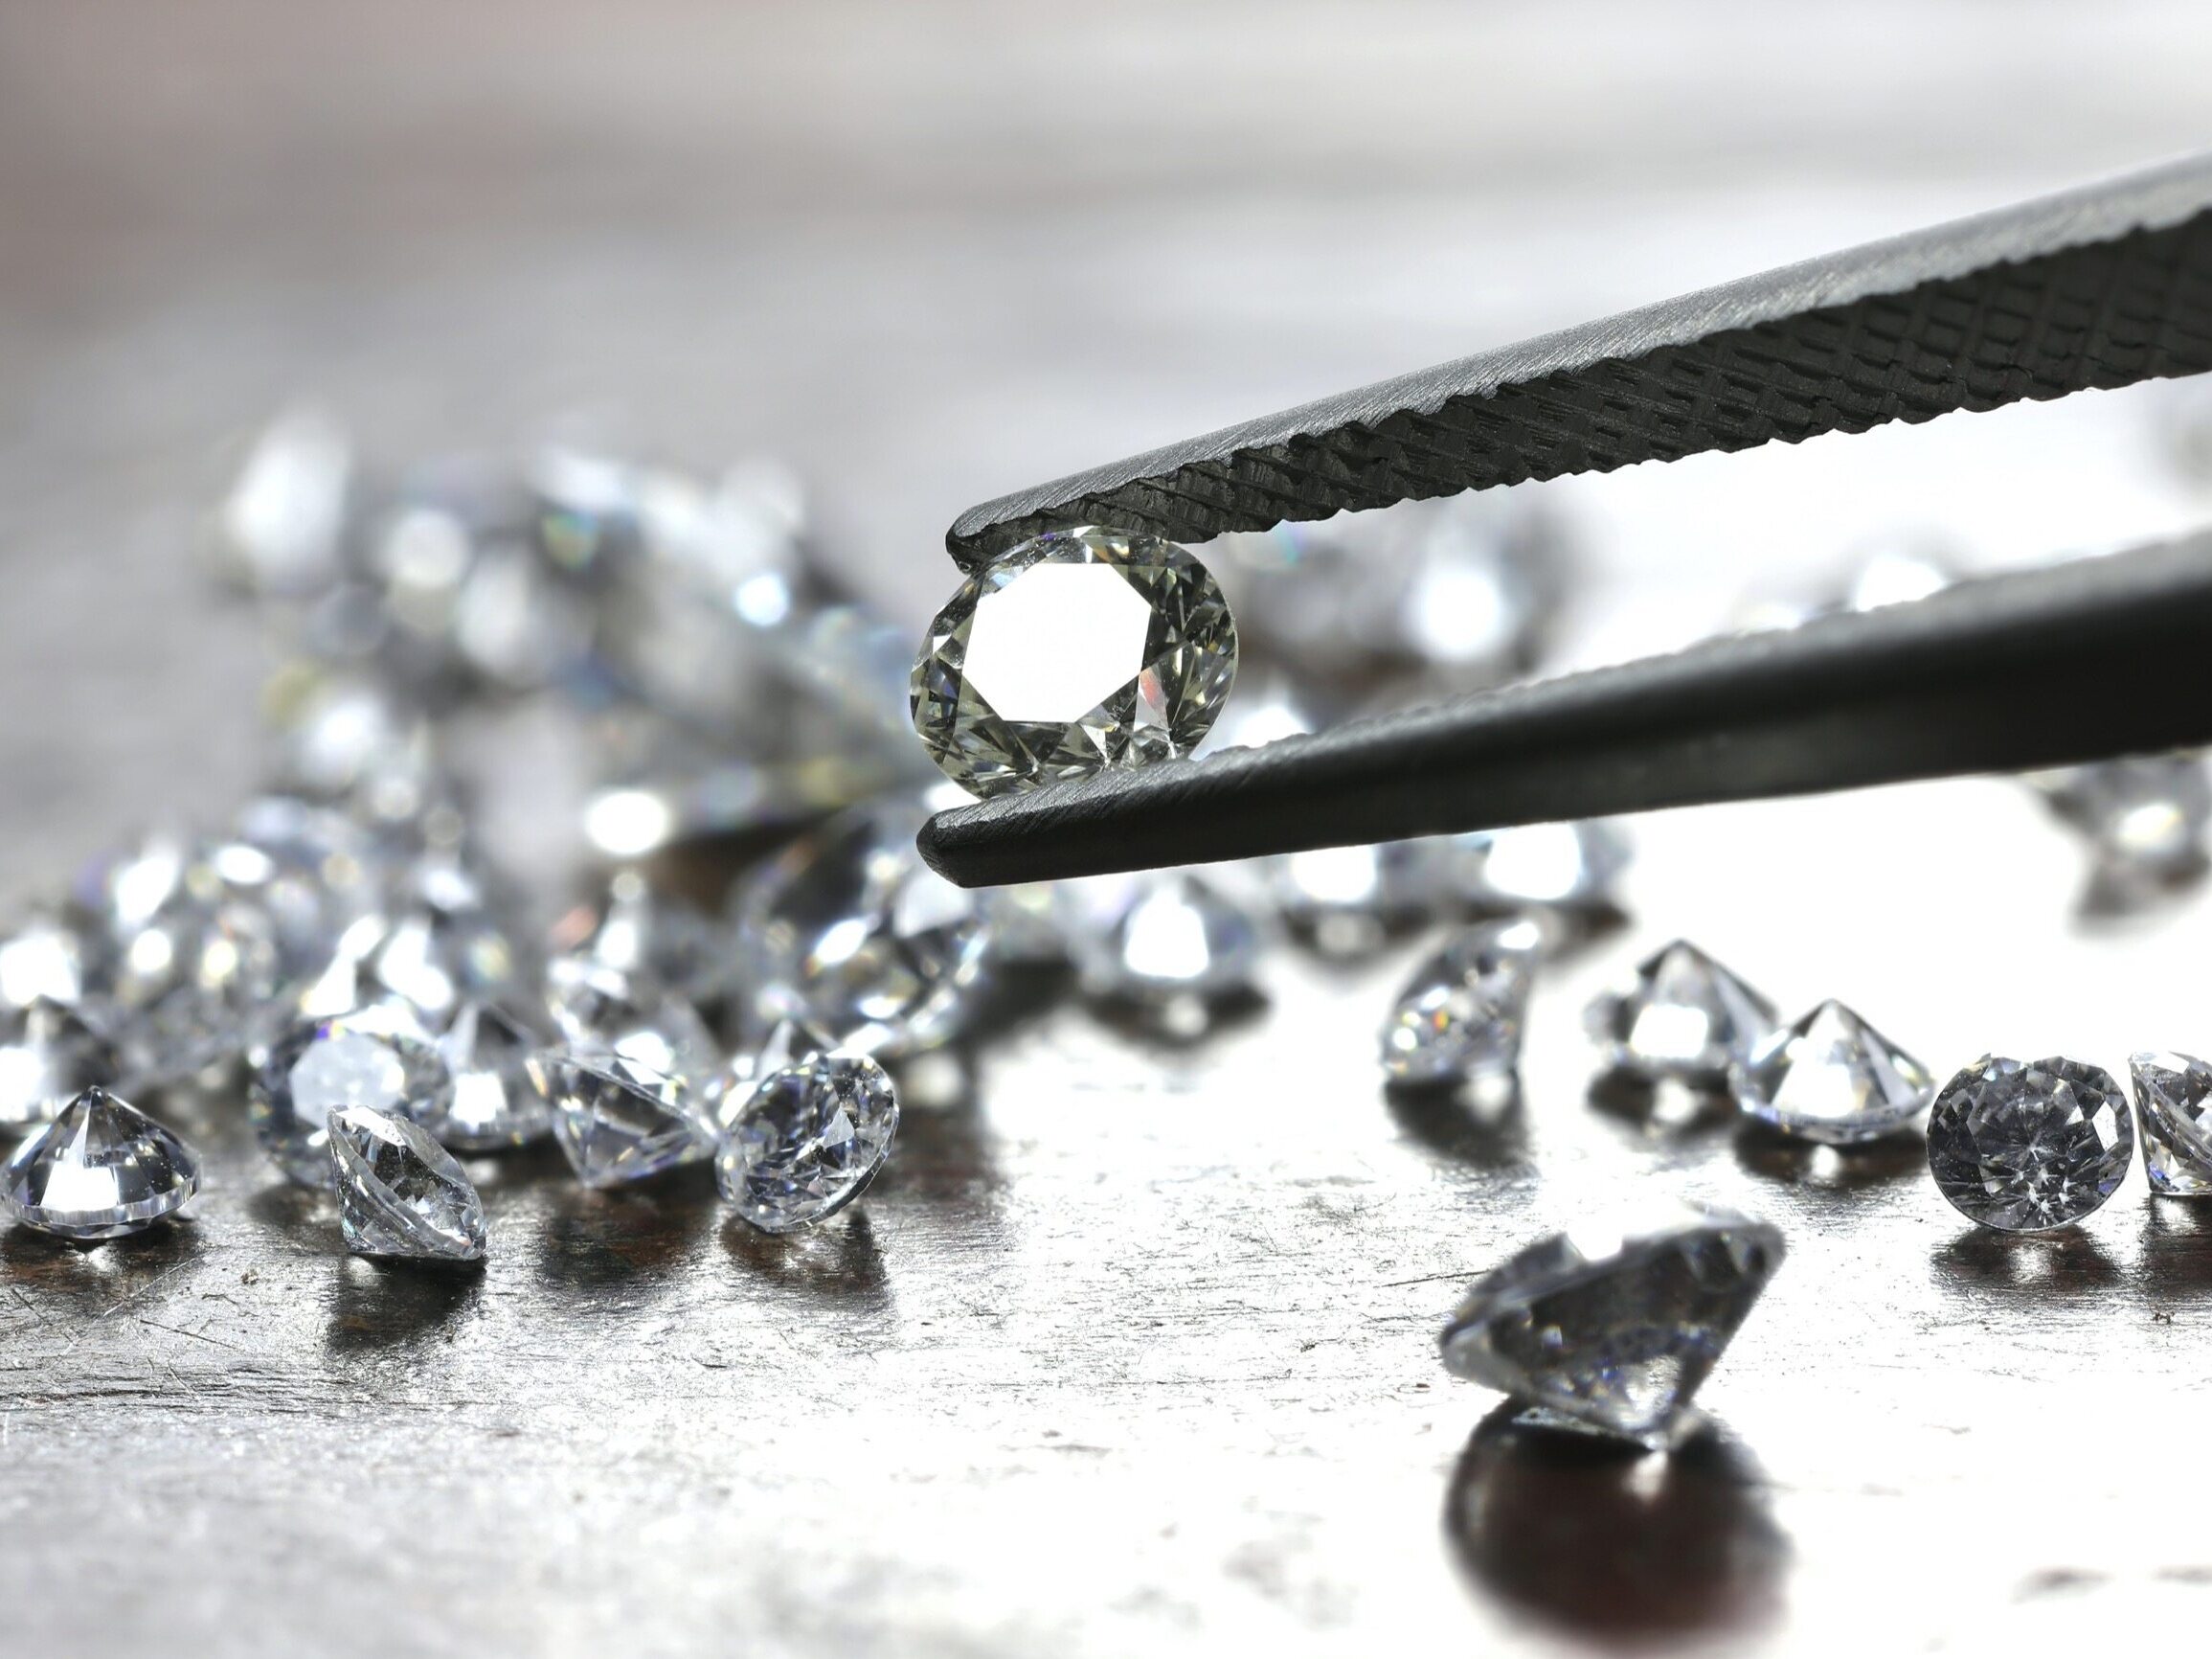 Sanctions on Russian diamonds are getting closer.  More and more countries in favor